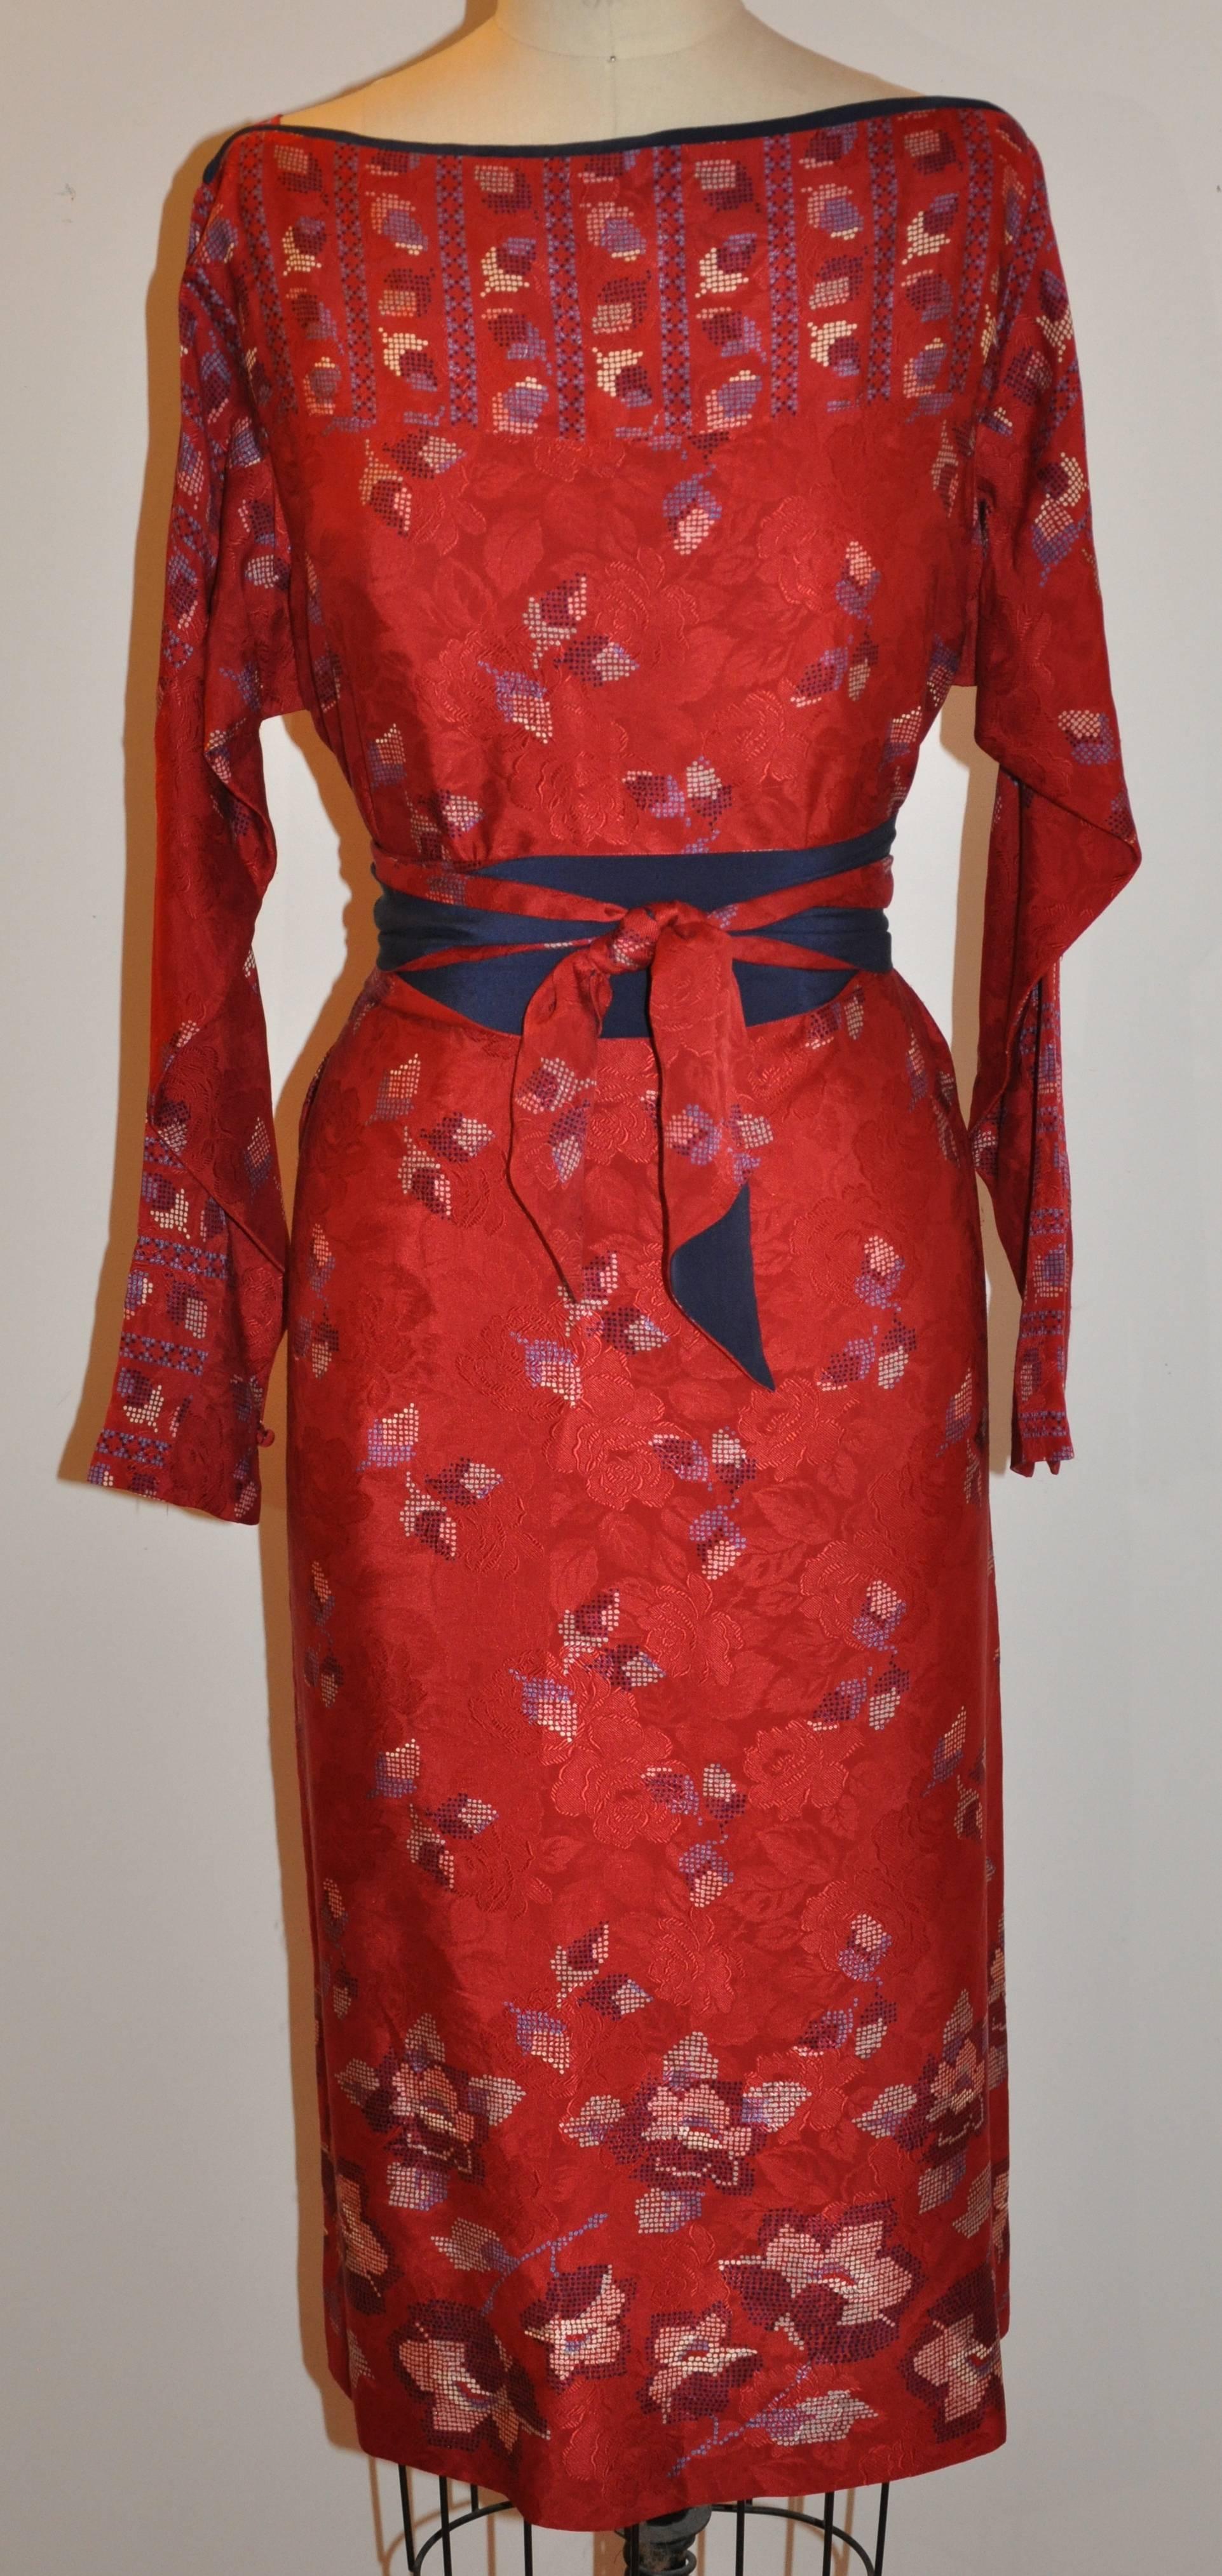    The iconic Halston's wonderful silk floral boat-neck sheath has multi-colors of bursting florals over a red-on-red roses print underneath. The matching self-tie belt measures 5 inches x 73 inches with one side in navy, giving the option to wear